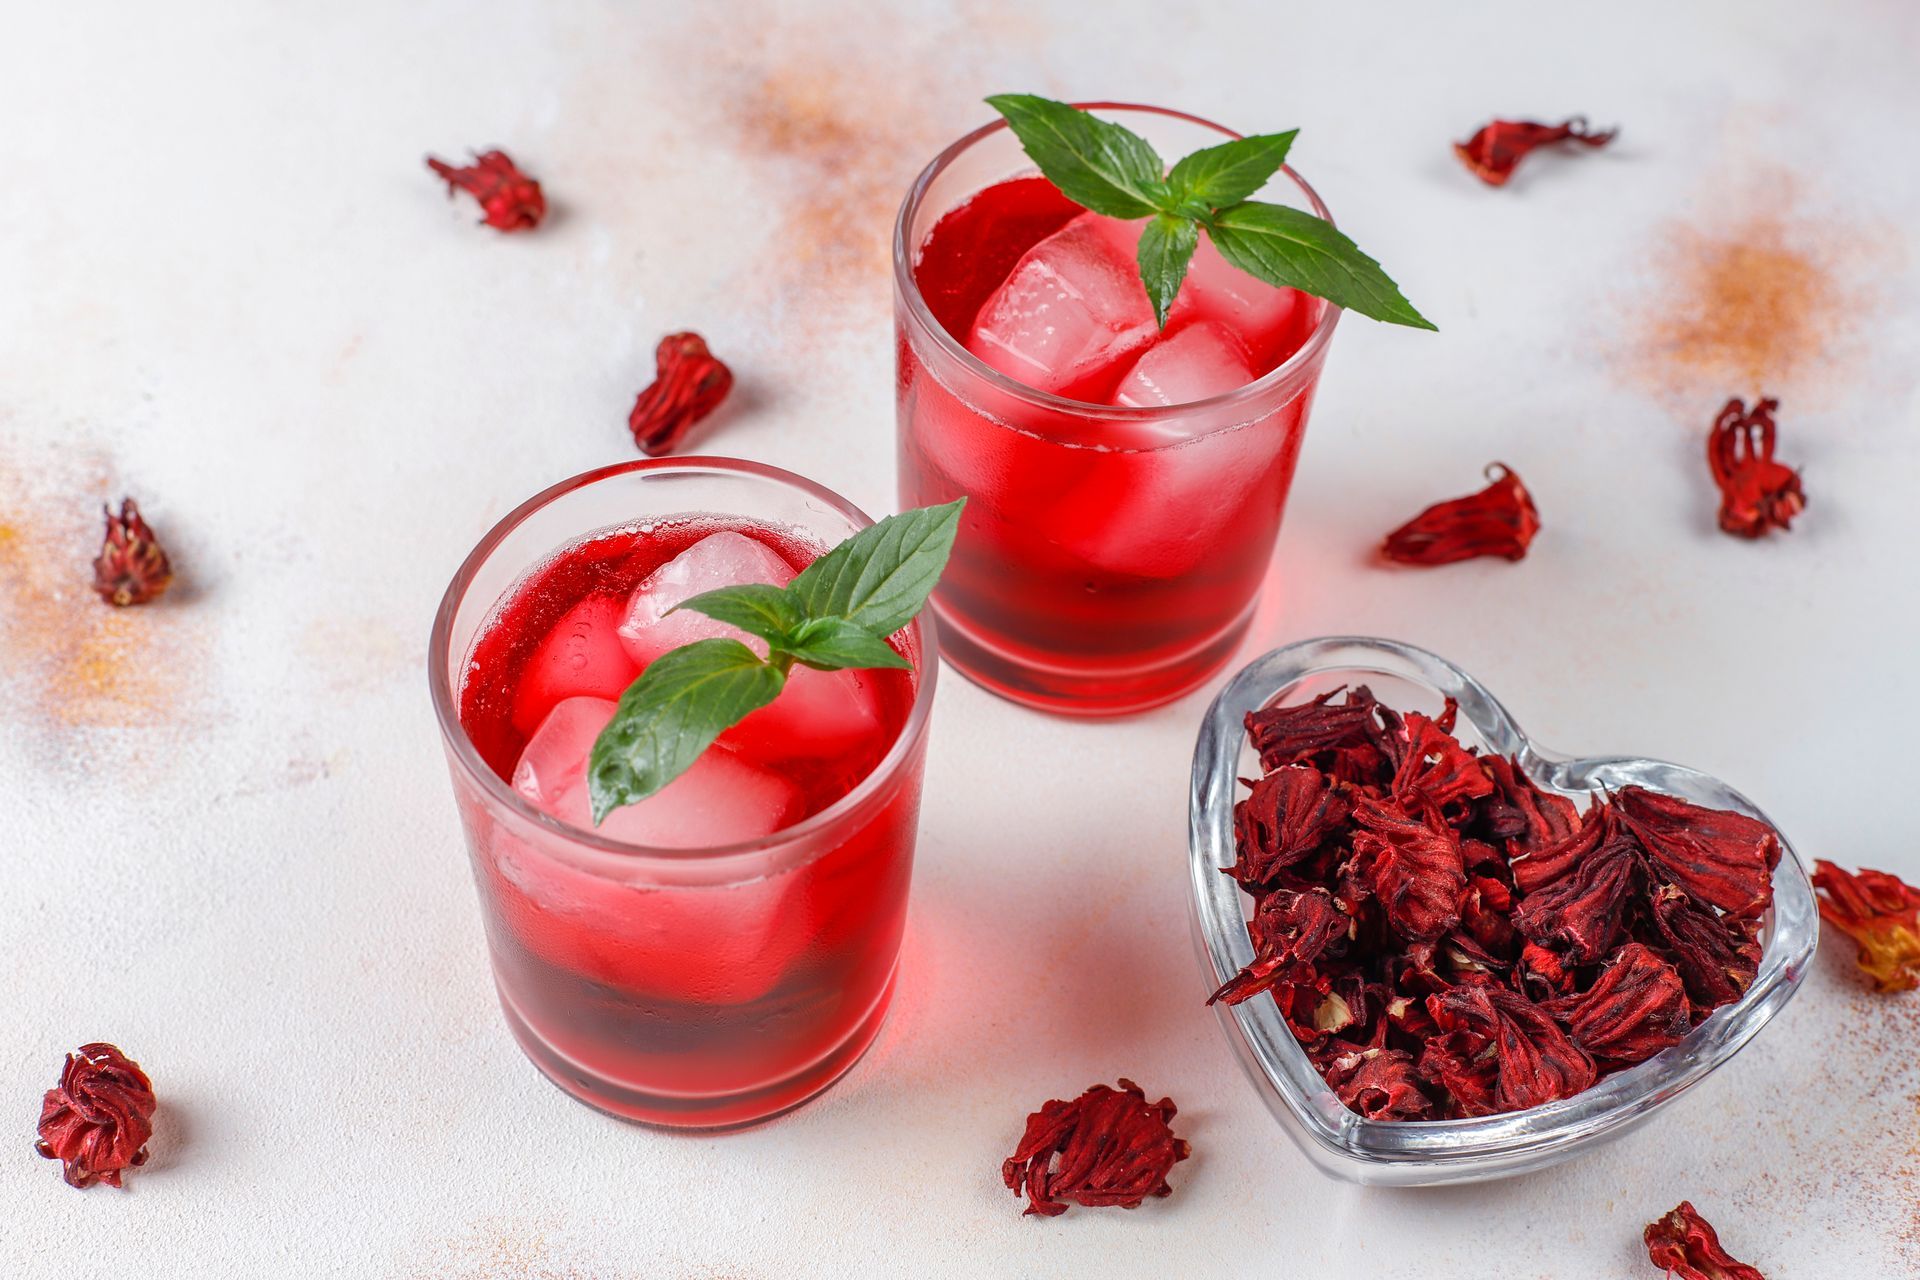 Two glasses of hibiscus tea with ice cubes and a heart shaped bowl of dried hibiscus flowers.